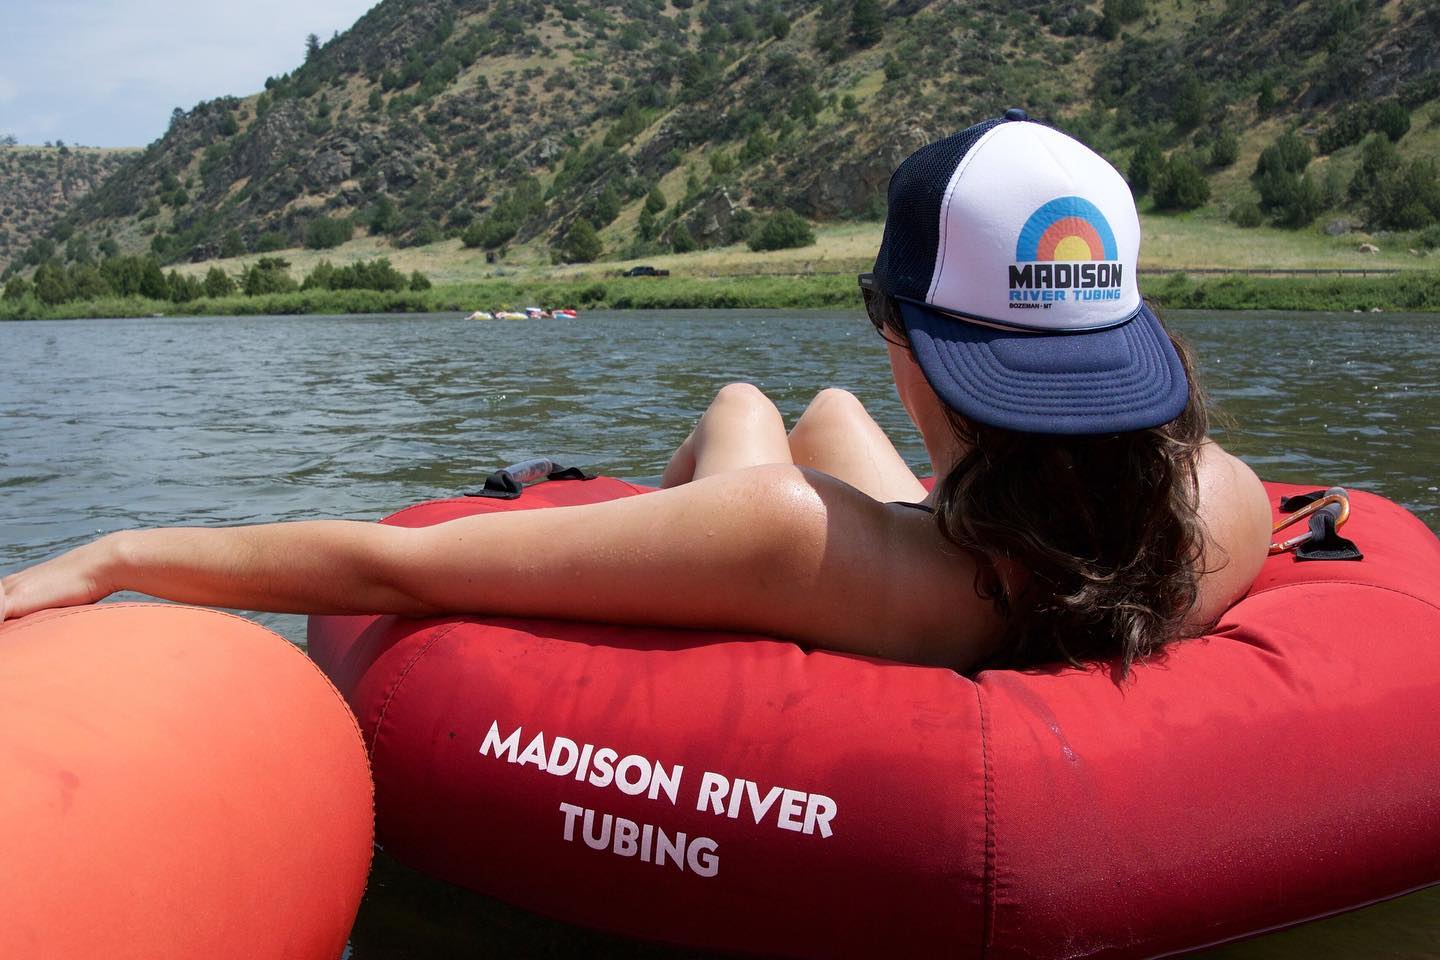 private tubing trip on Madison River